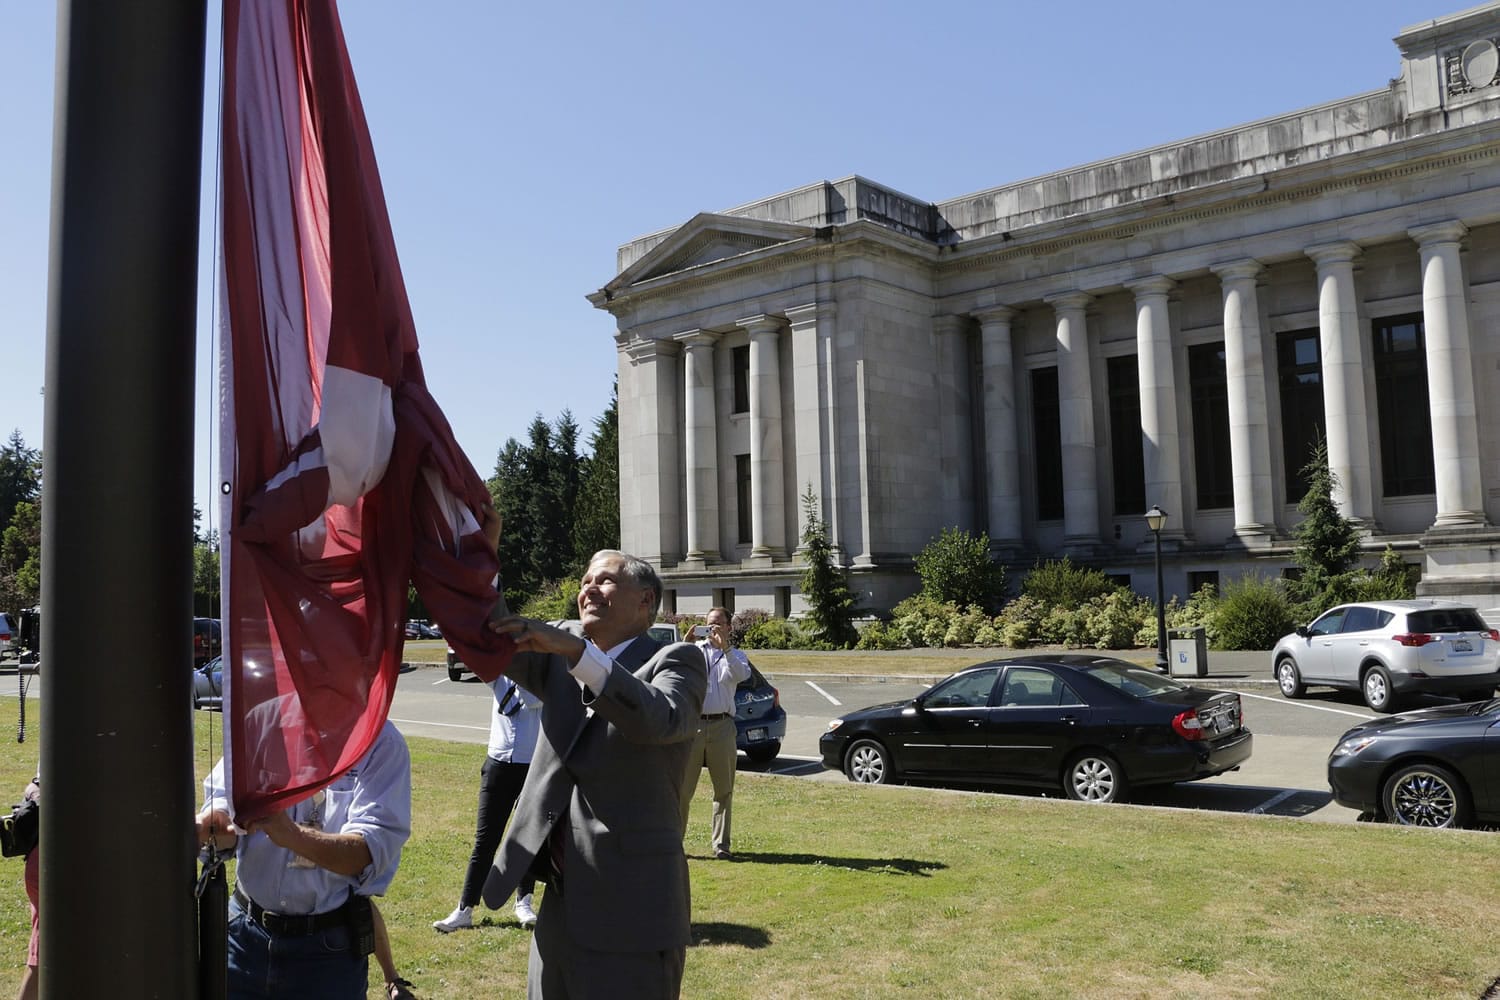 Gov. Jay Inslee raises the flag of Washington State University in honor of its late president, Elson Floyd, on Thursday in Olympia.